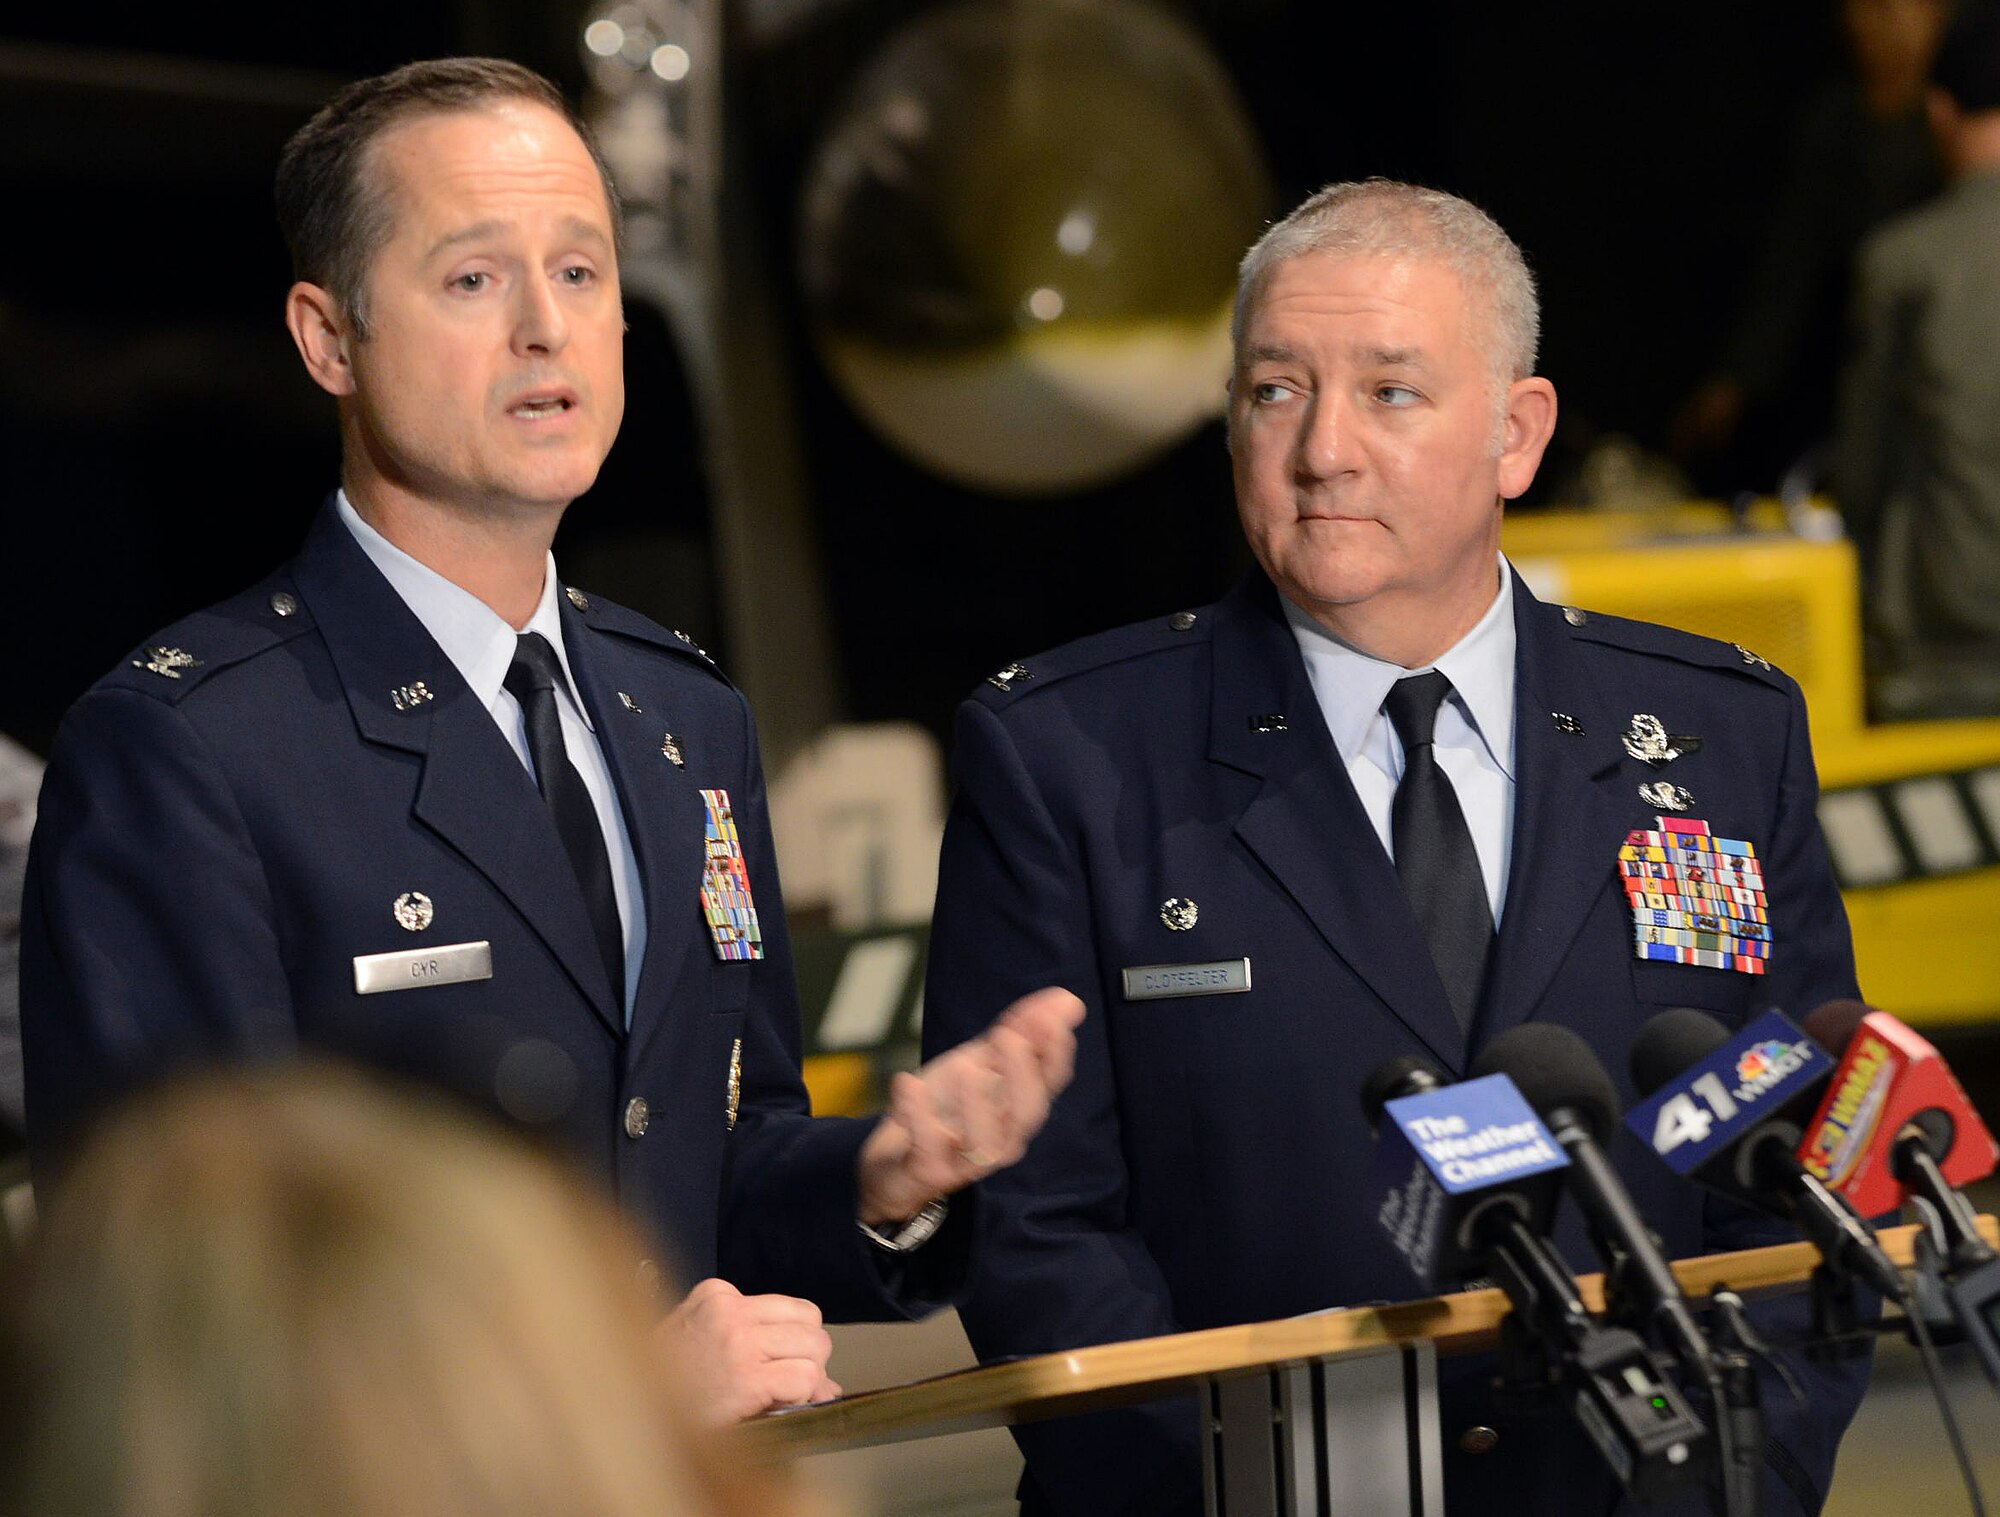 Commanders Col. Henry Cyr, left, 461st Air Control Wing, and Col. Kevin Clotfelter, 116th ACW, address media at a press conference in the Museum of Aviation, Oct. 8, 2014. (U.S. Air Force photo by Tommie Horton)